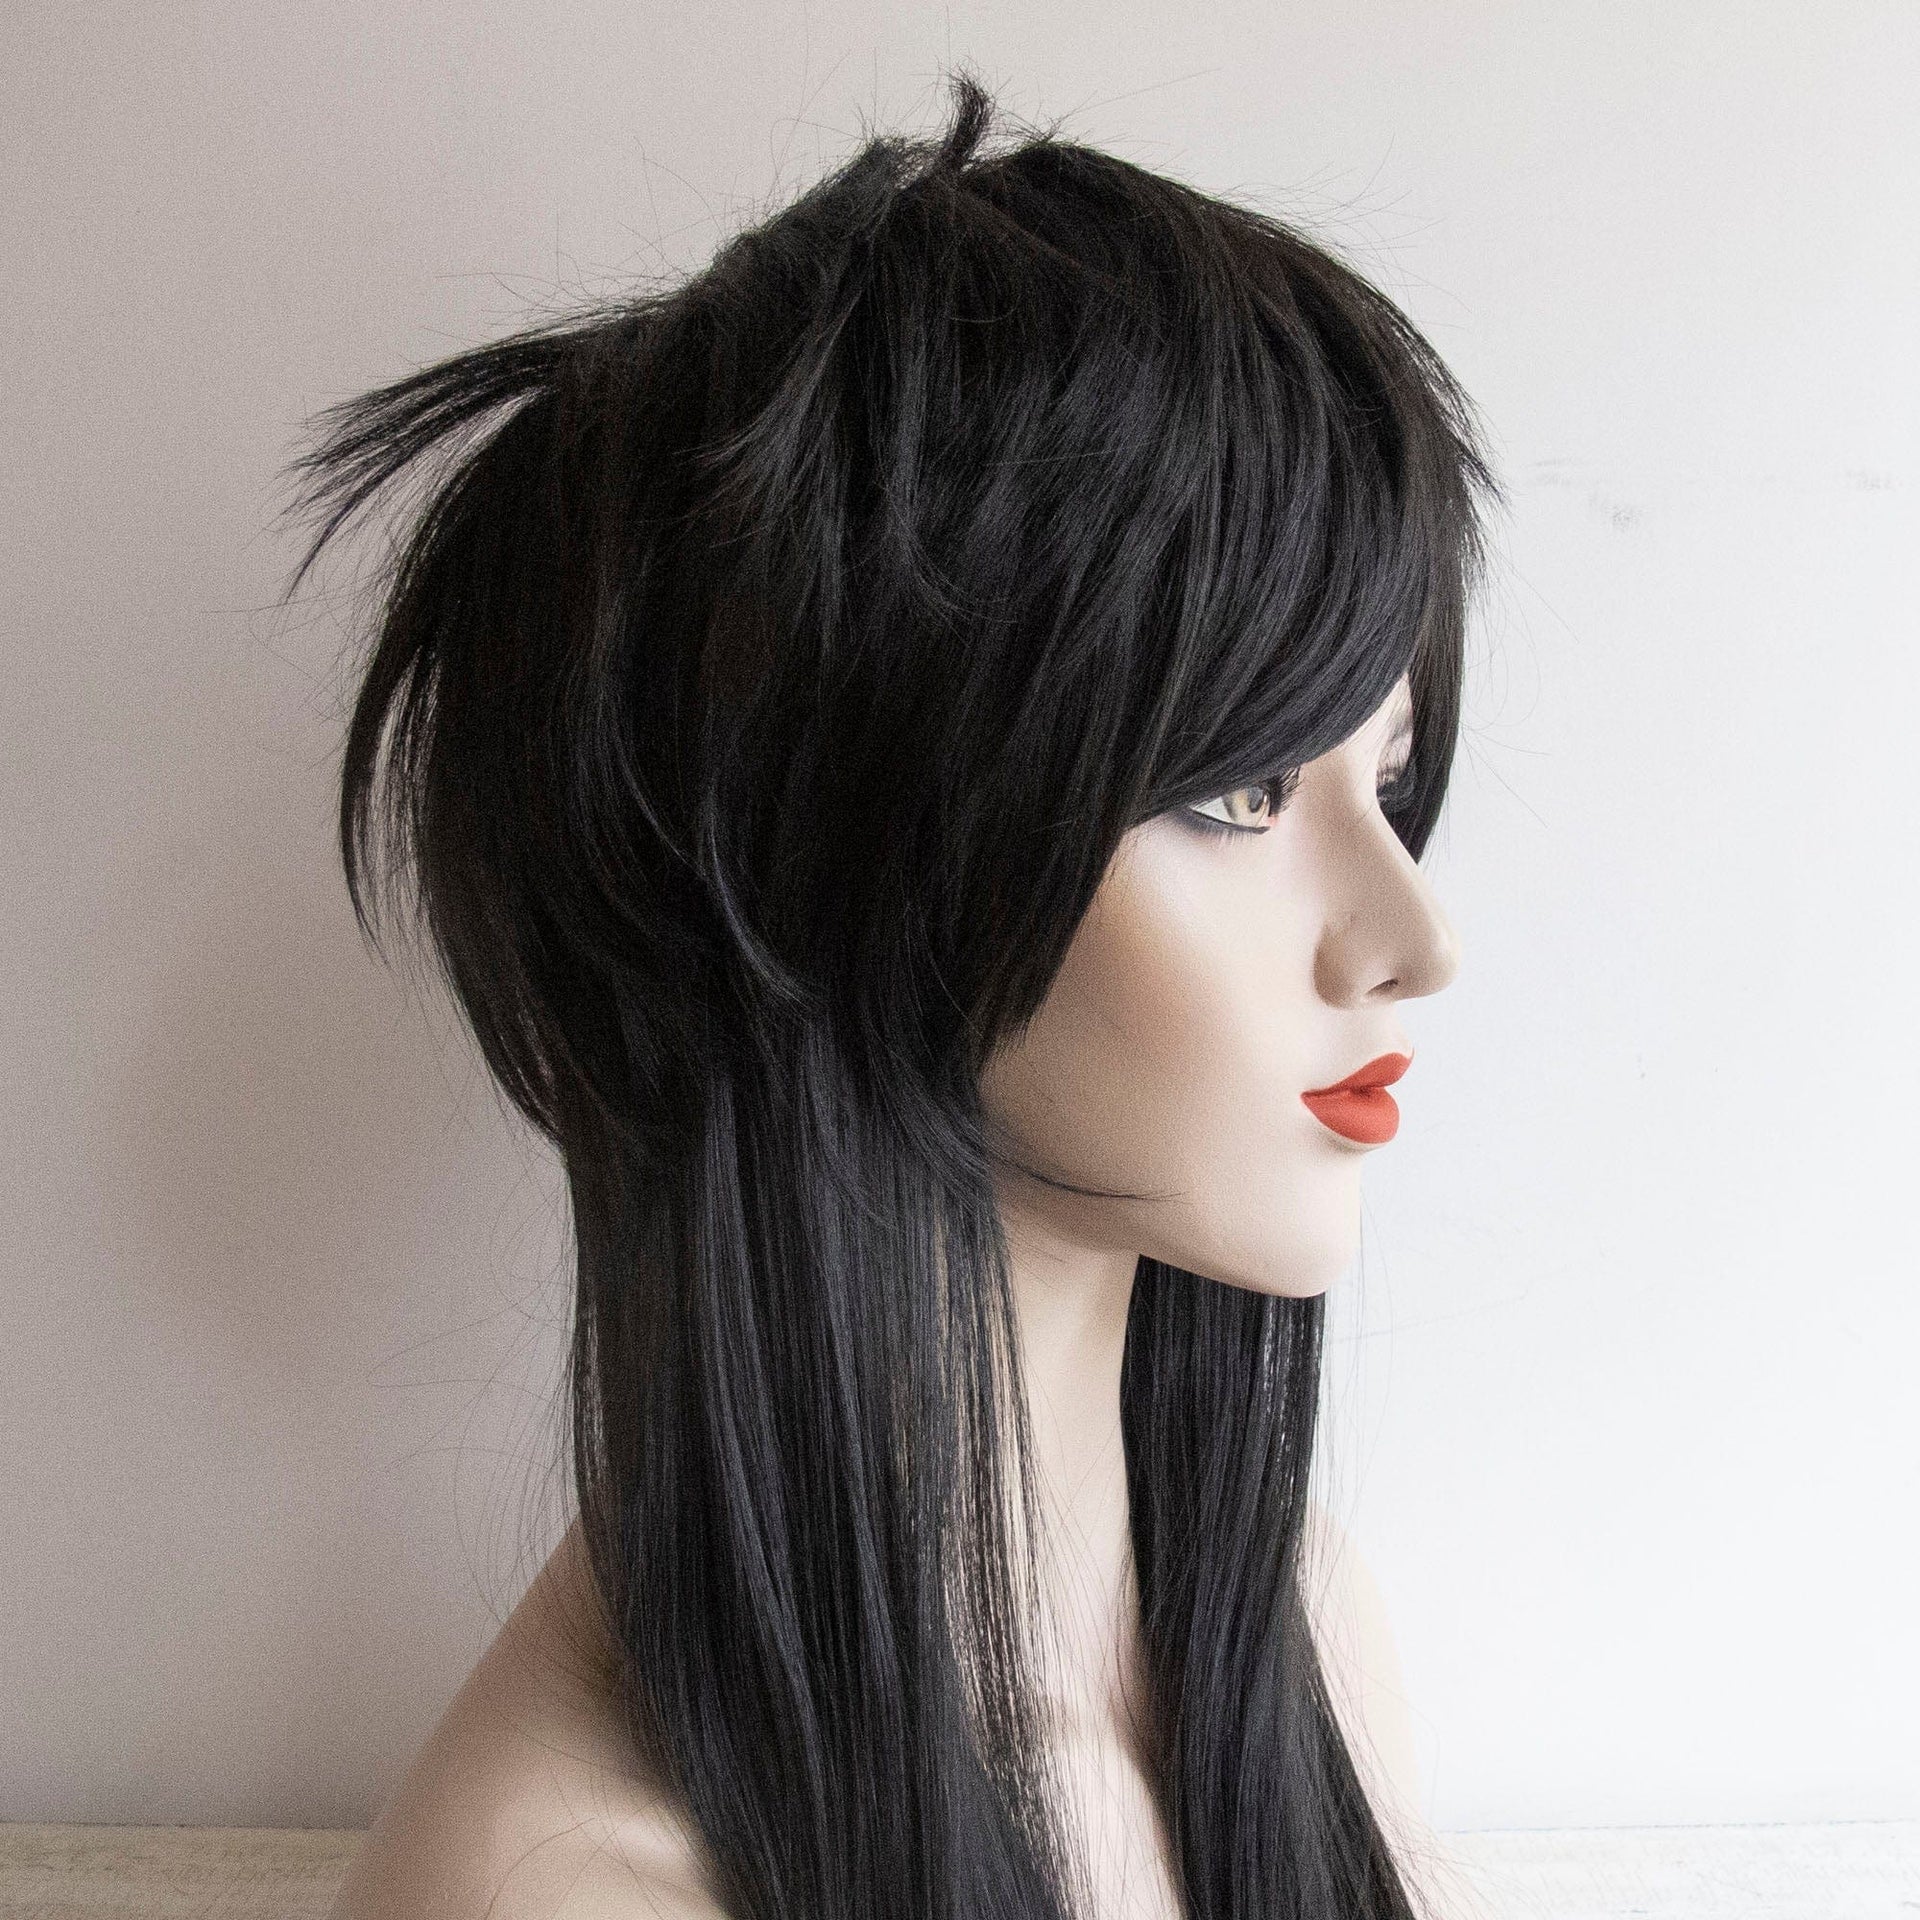 nevermindyrhead Wolf Cut Wig for women (Black Long Straight Fringe Bangs Gothic Mullet)